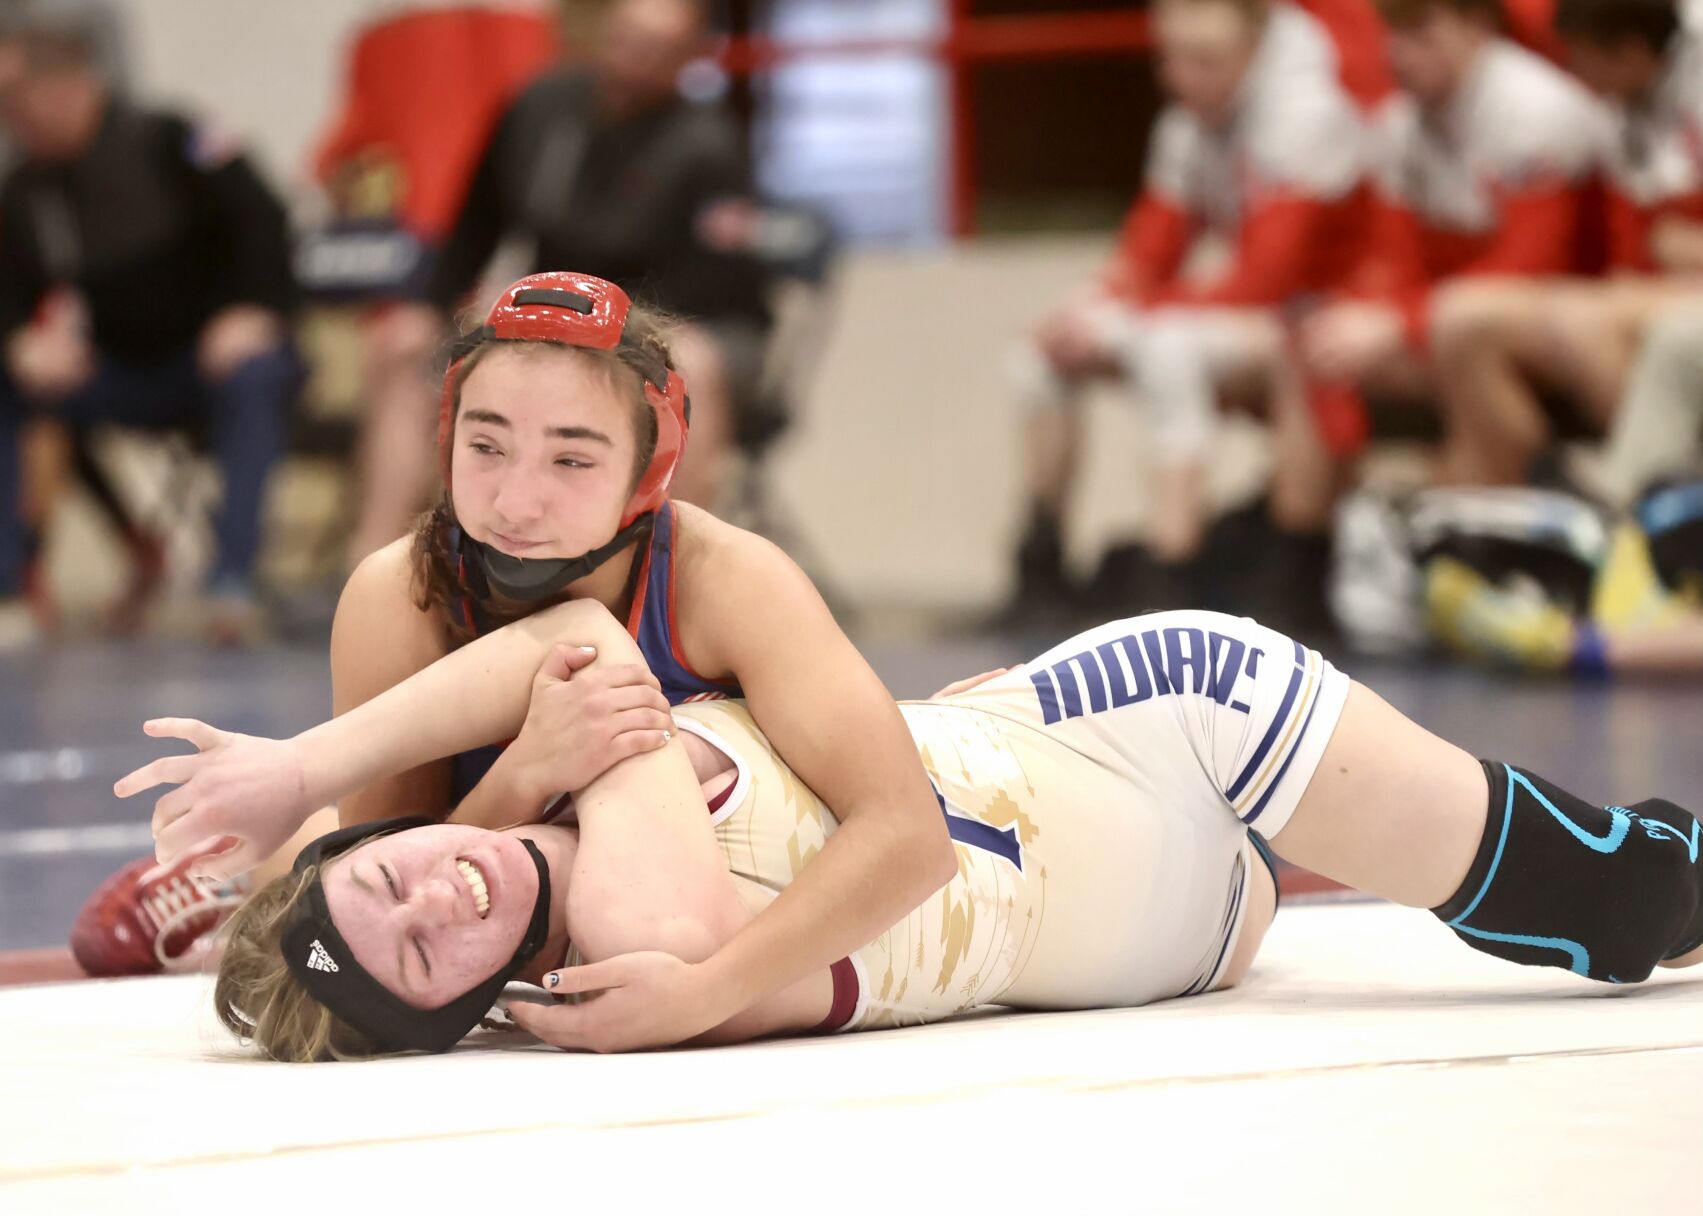 High school wrestling district competition to kick off Preps idahostatejournal Sex Image Hq